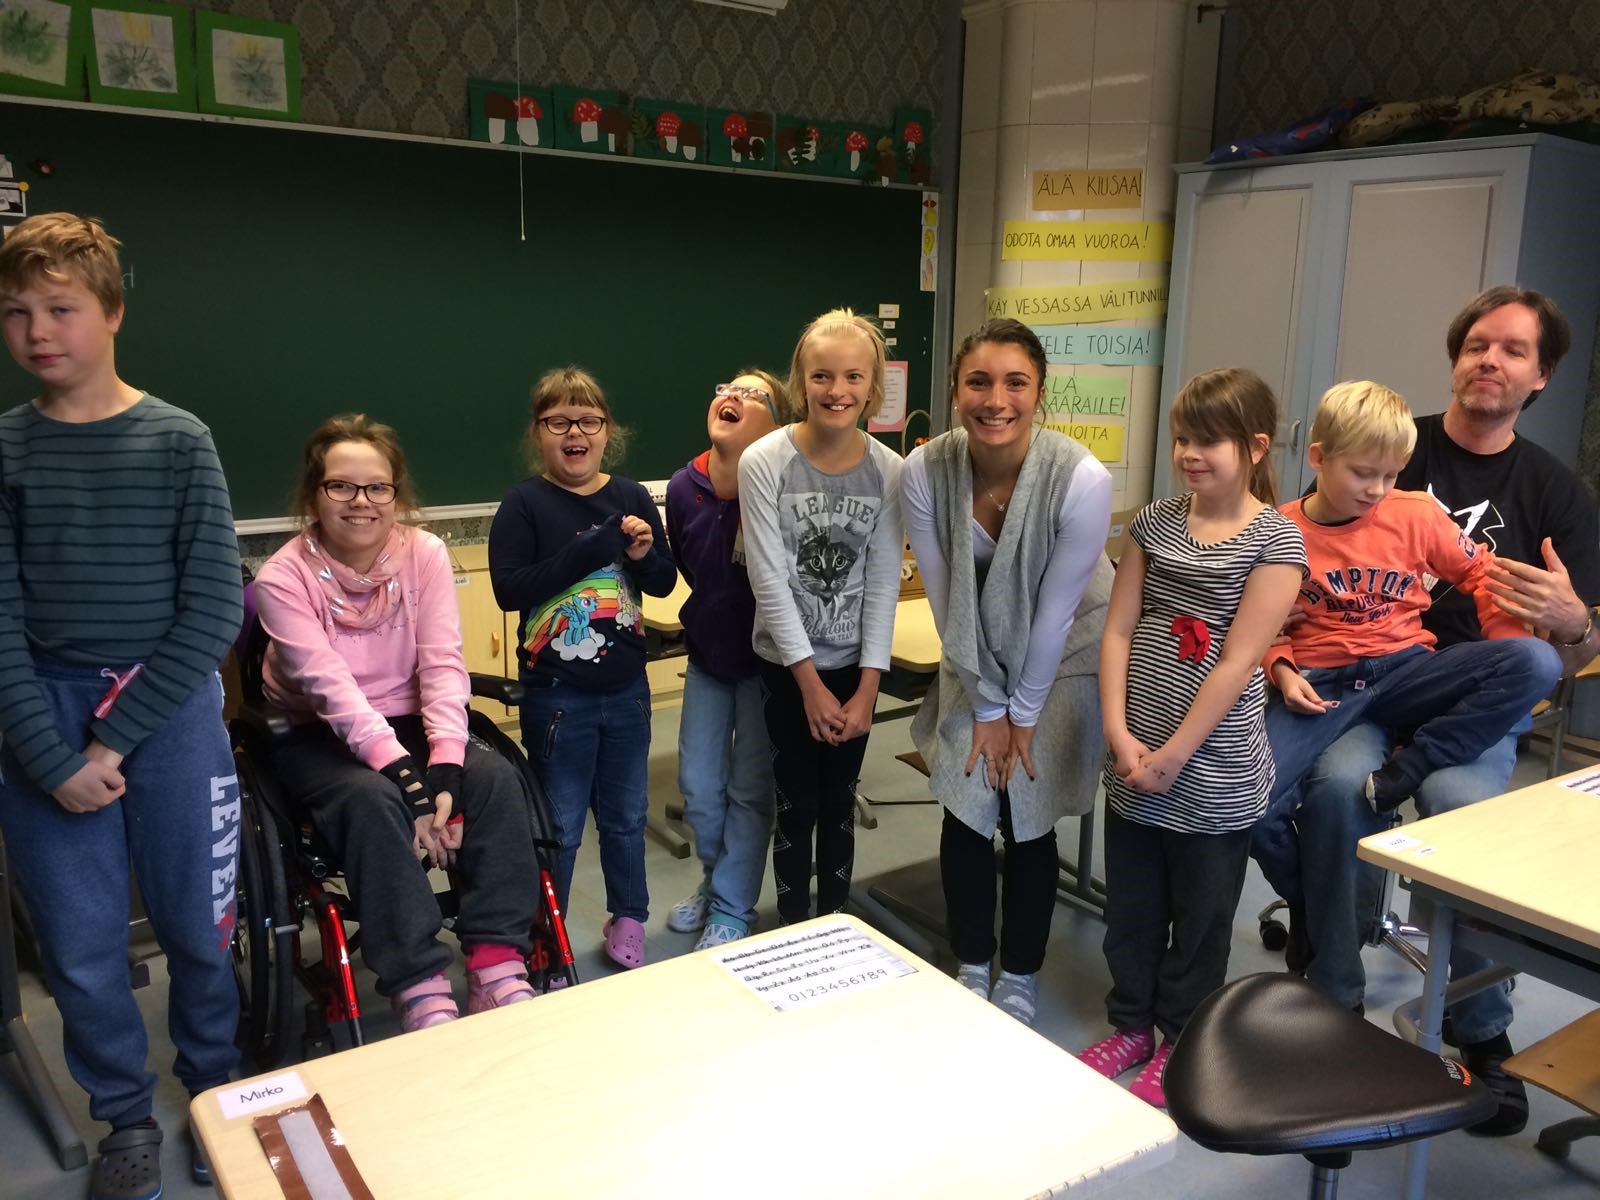 Jessica Volpe (pictured center) poses with her class in Finland.